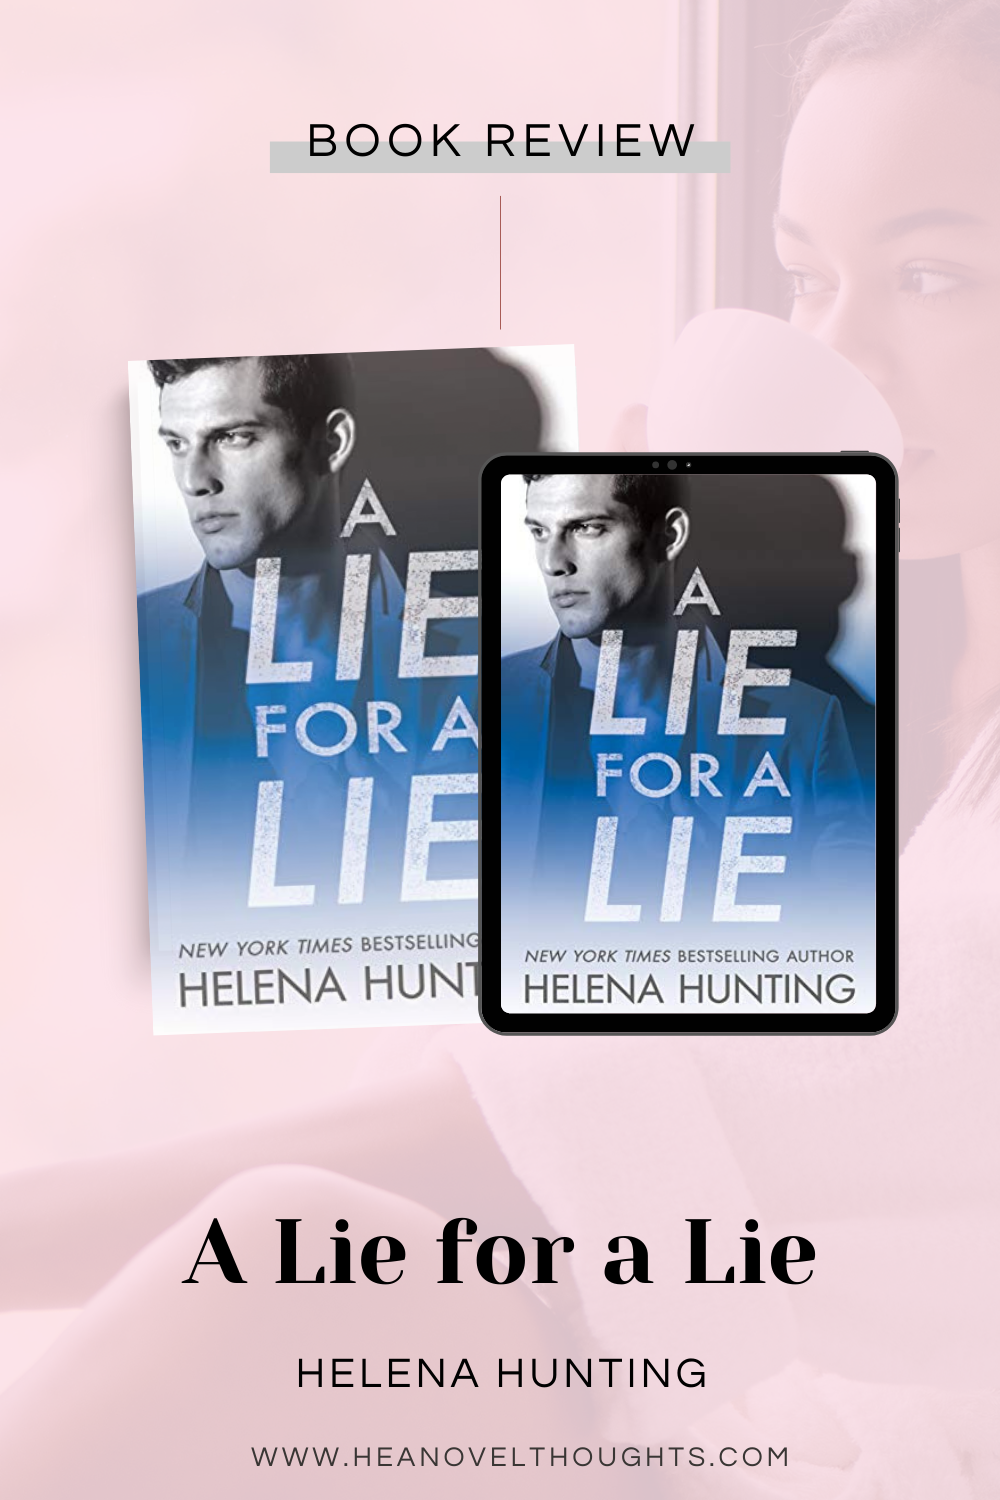 A Lie for A Lie by Helena Hunting